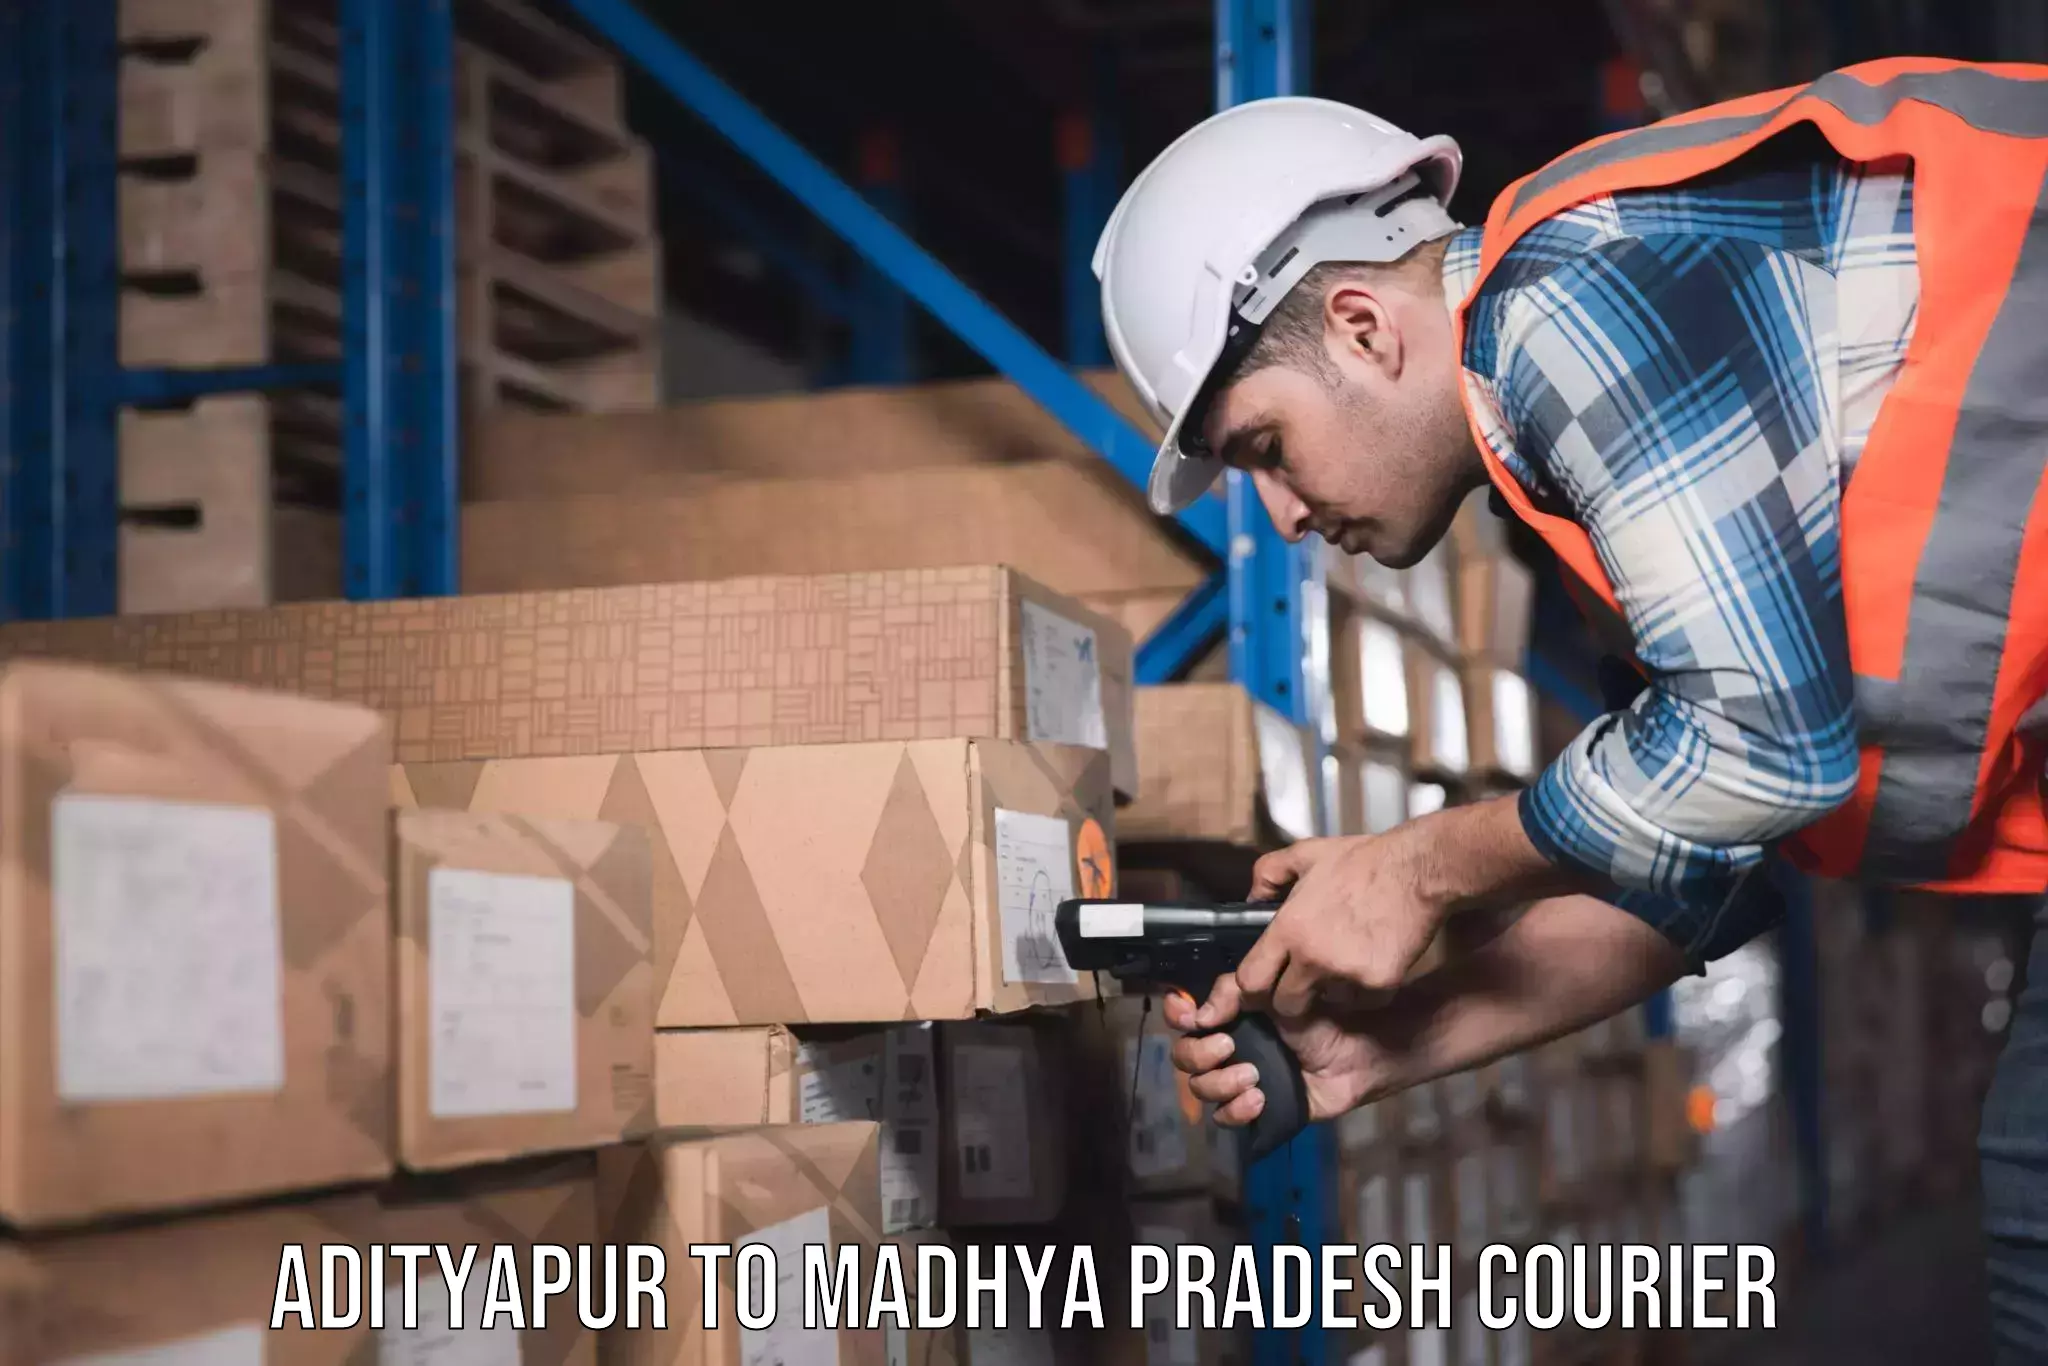 Trusted relocation experts Adityapur to Gotegaon